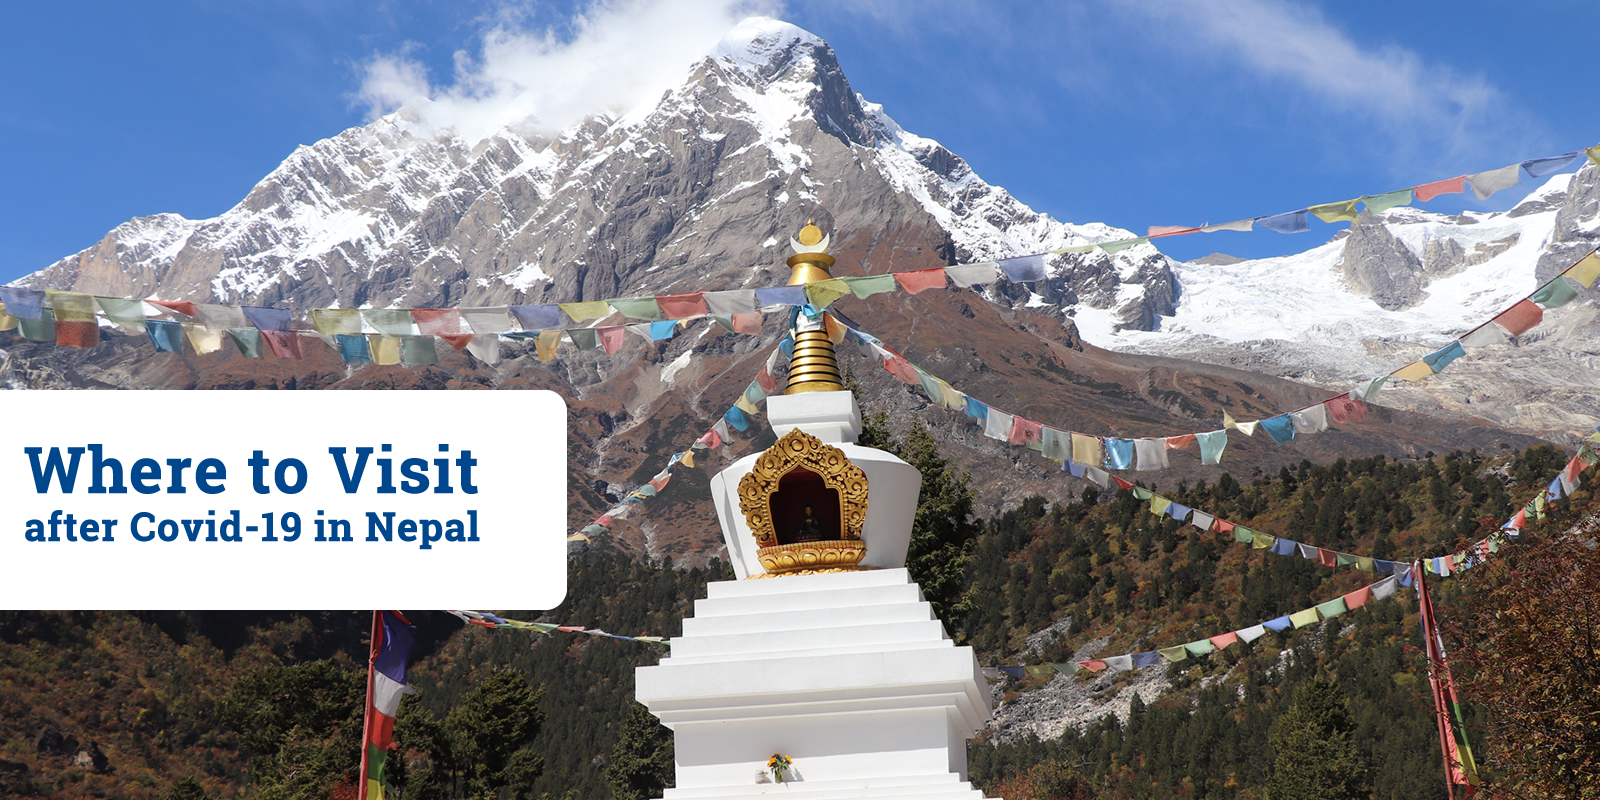 Where to visit after COVID-19 in Nepal